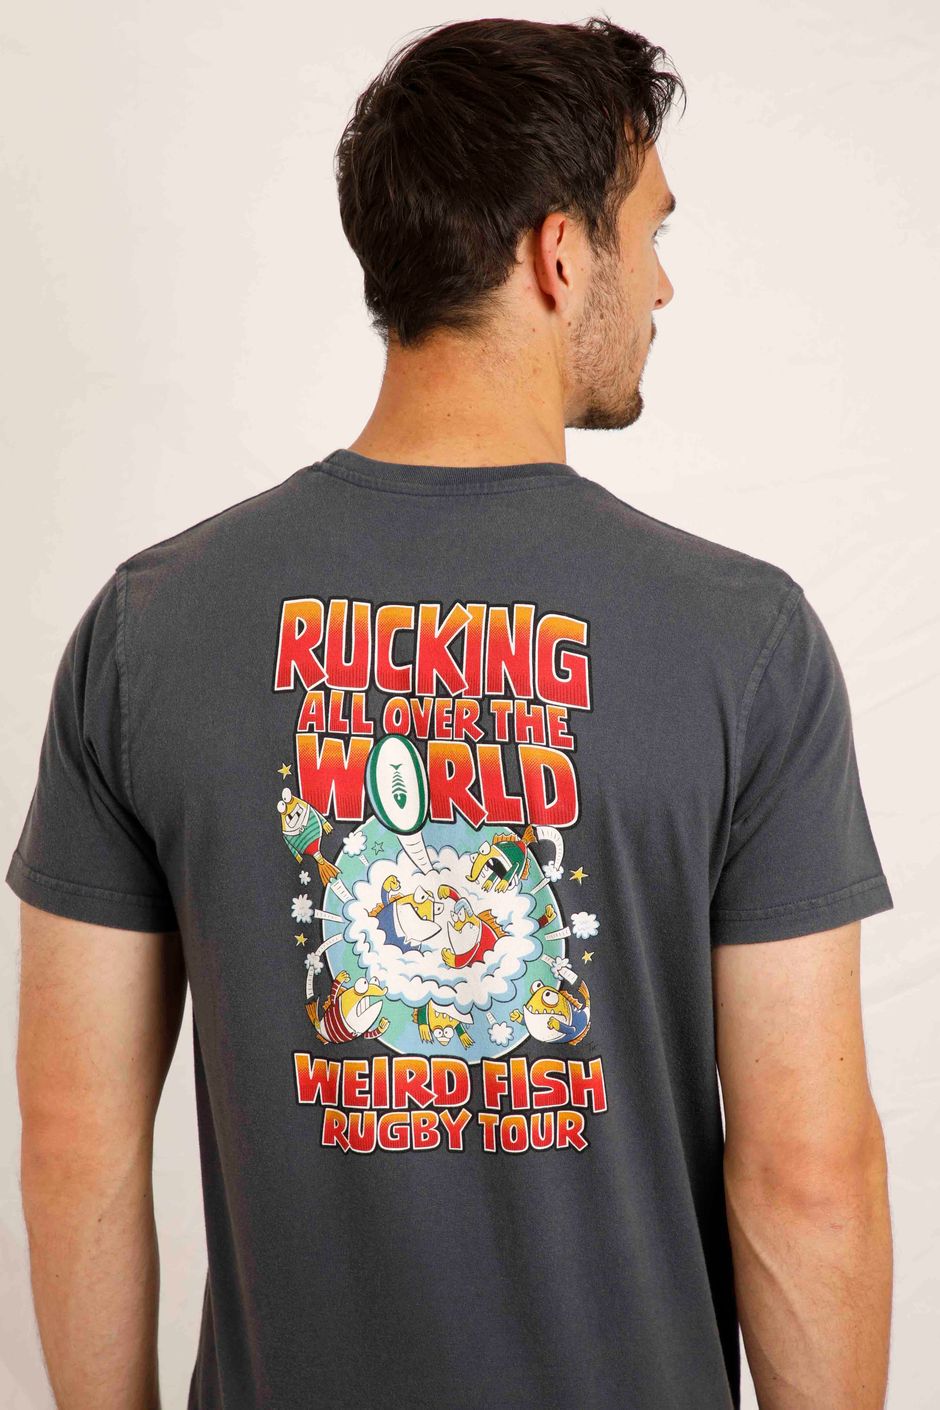 Rucking Heritage Artist T-Shirt Rugby World Cup Navy